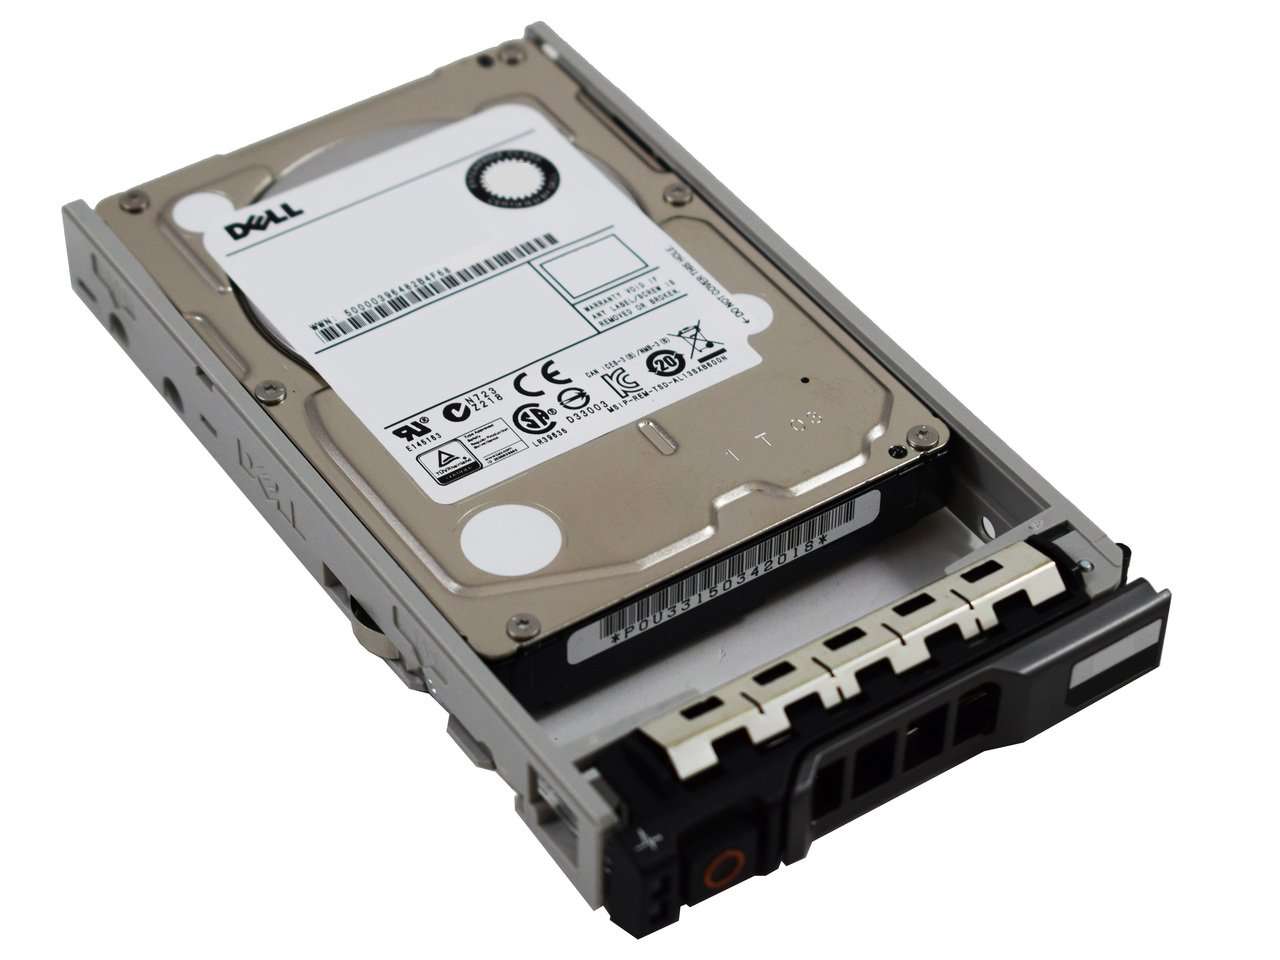 Dell G13 342-5738 600GB 10K RPM SAS 6Gb/s 512n 2.5" Manufacturer Recertified HDD